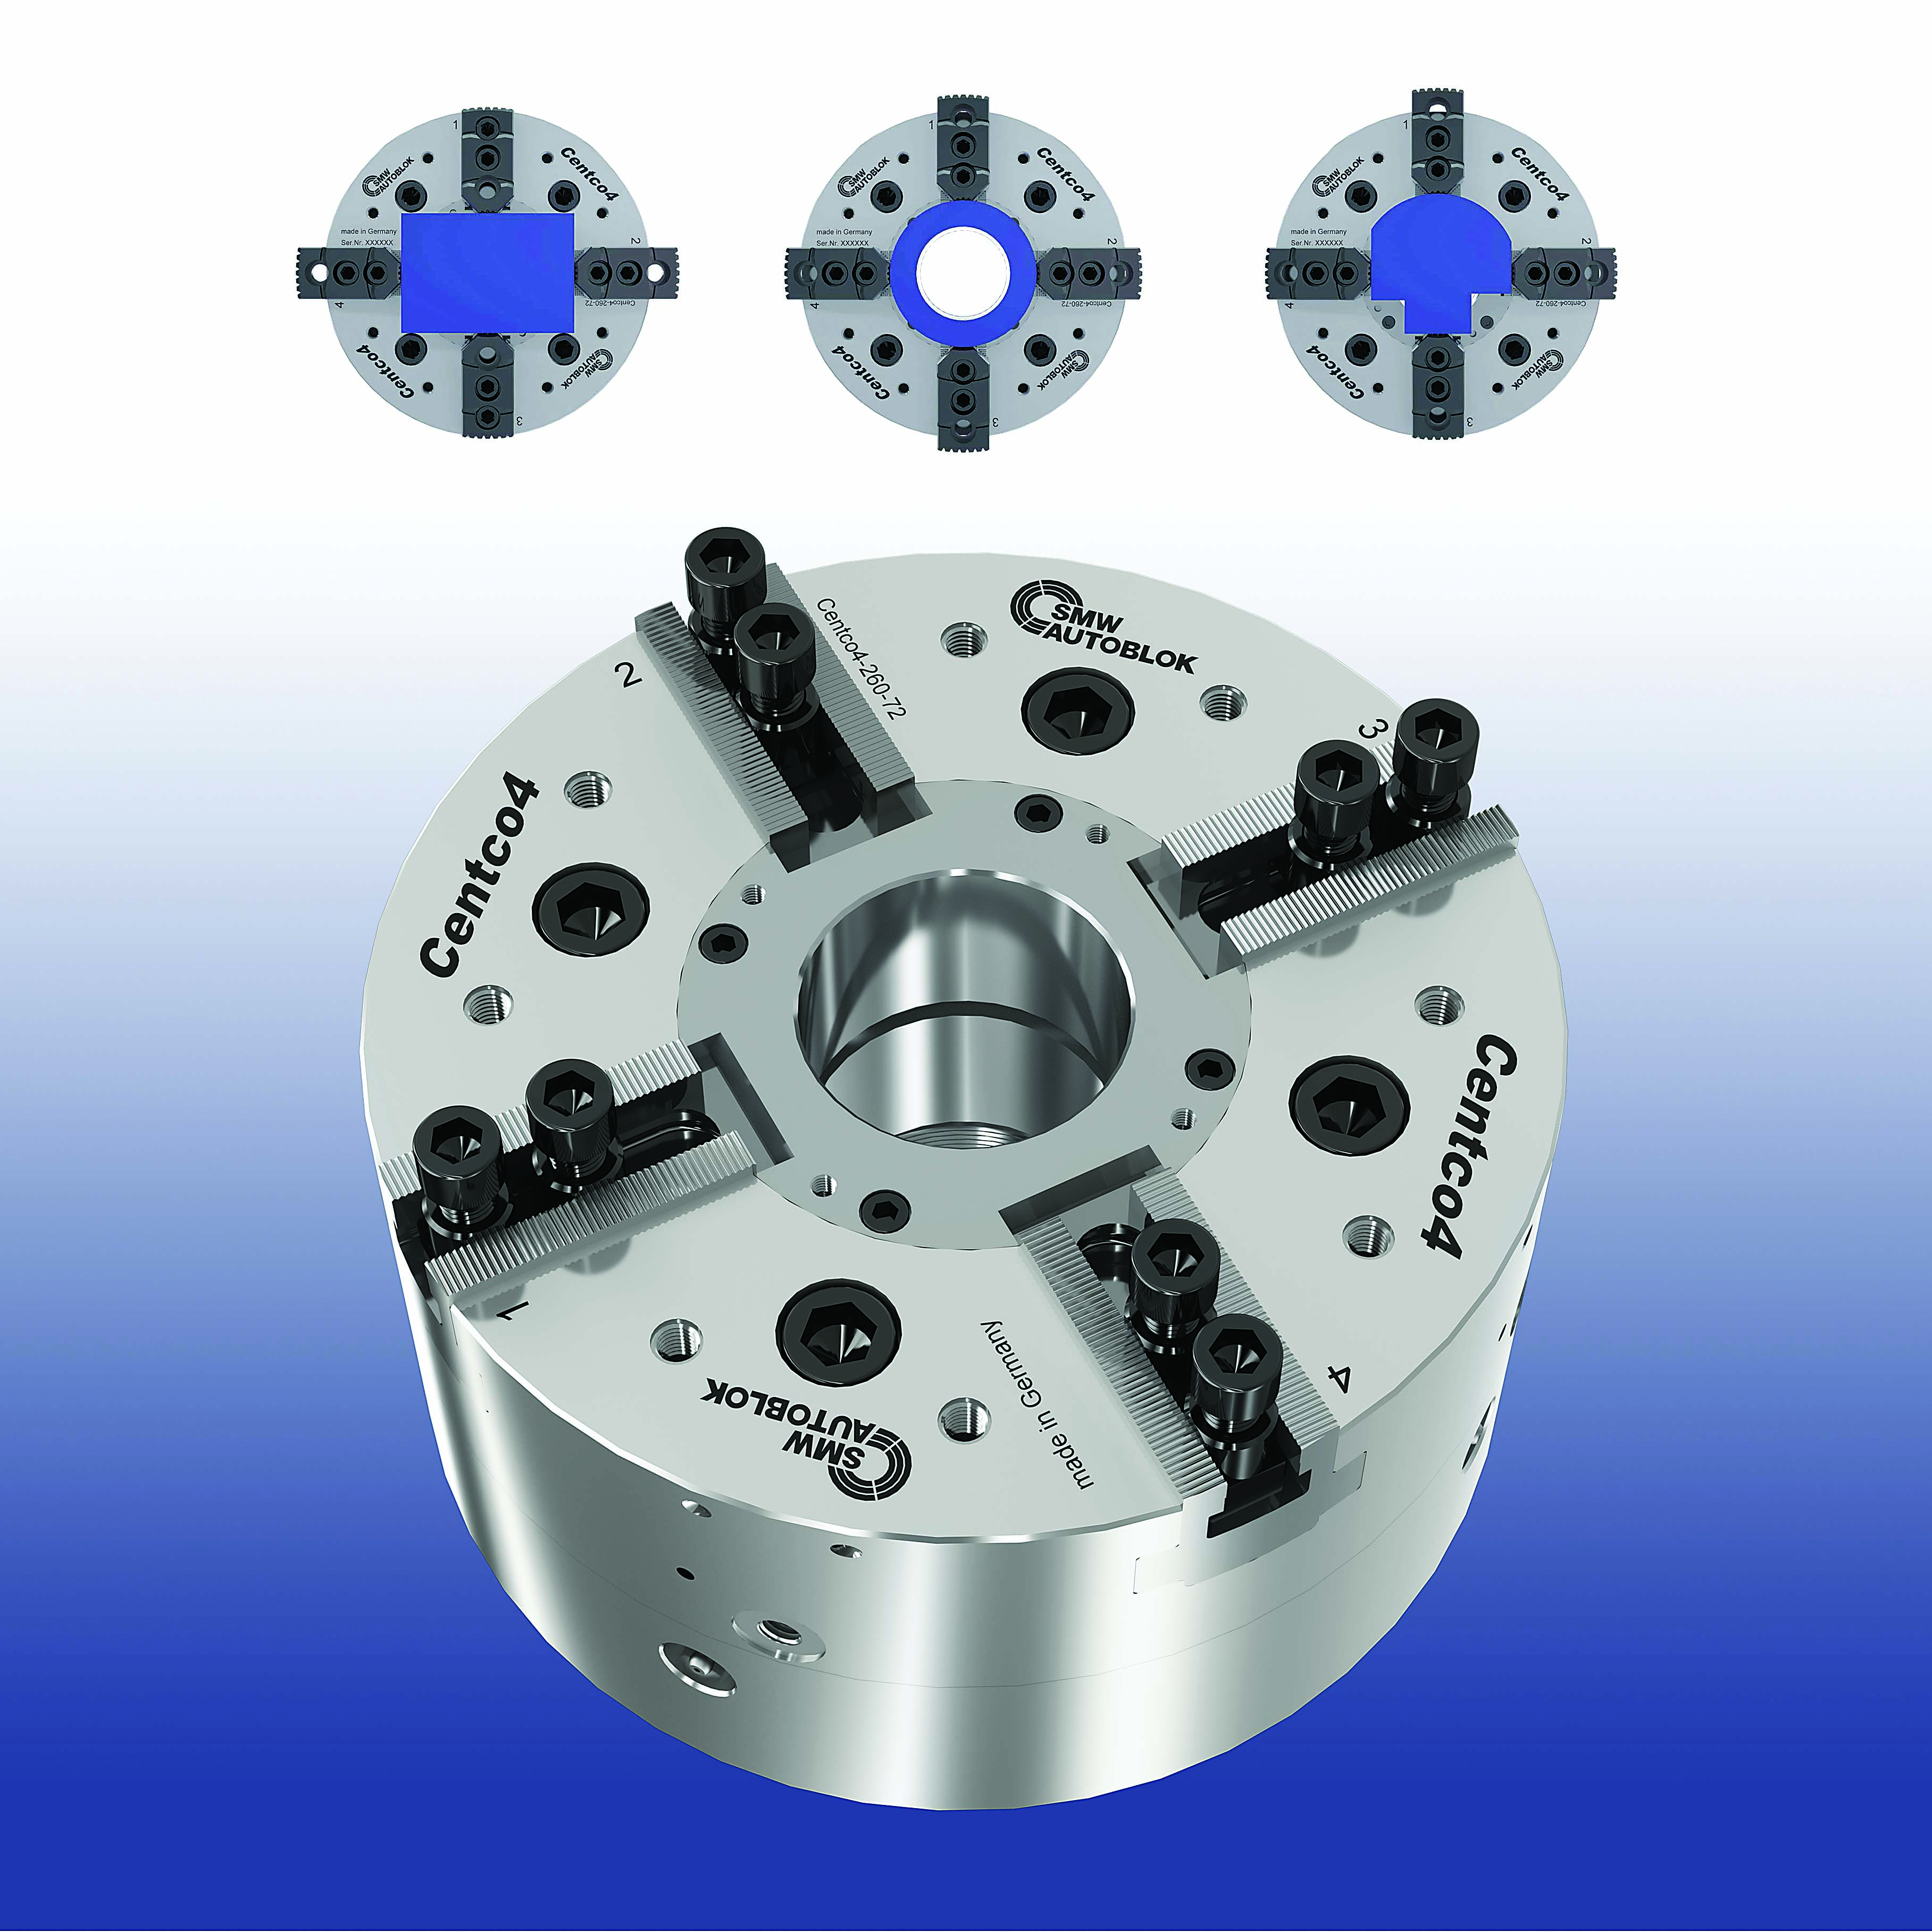 The Centco4 (2+2) self-centering and compensating chuck is designed to clamp any workpiece geometry.